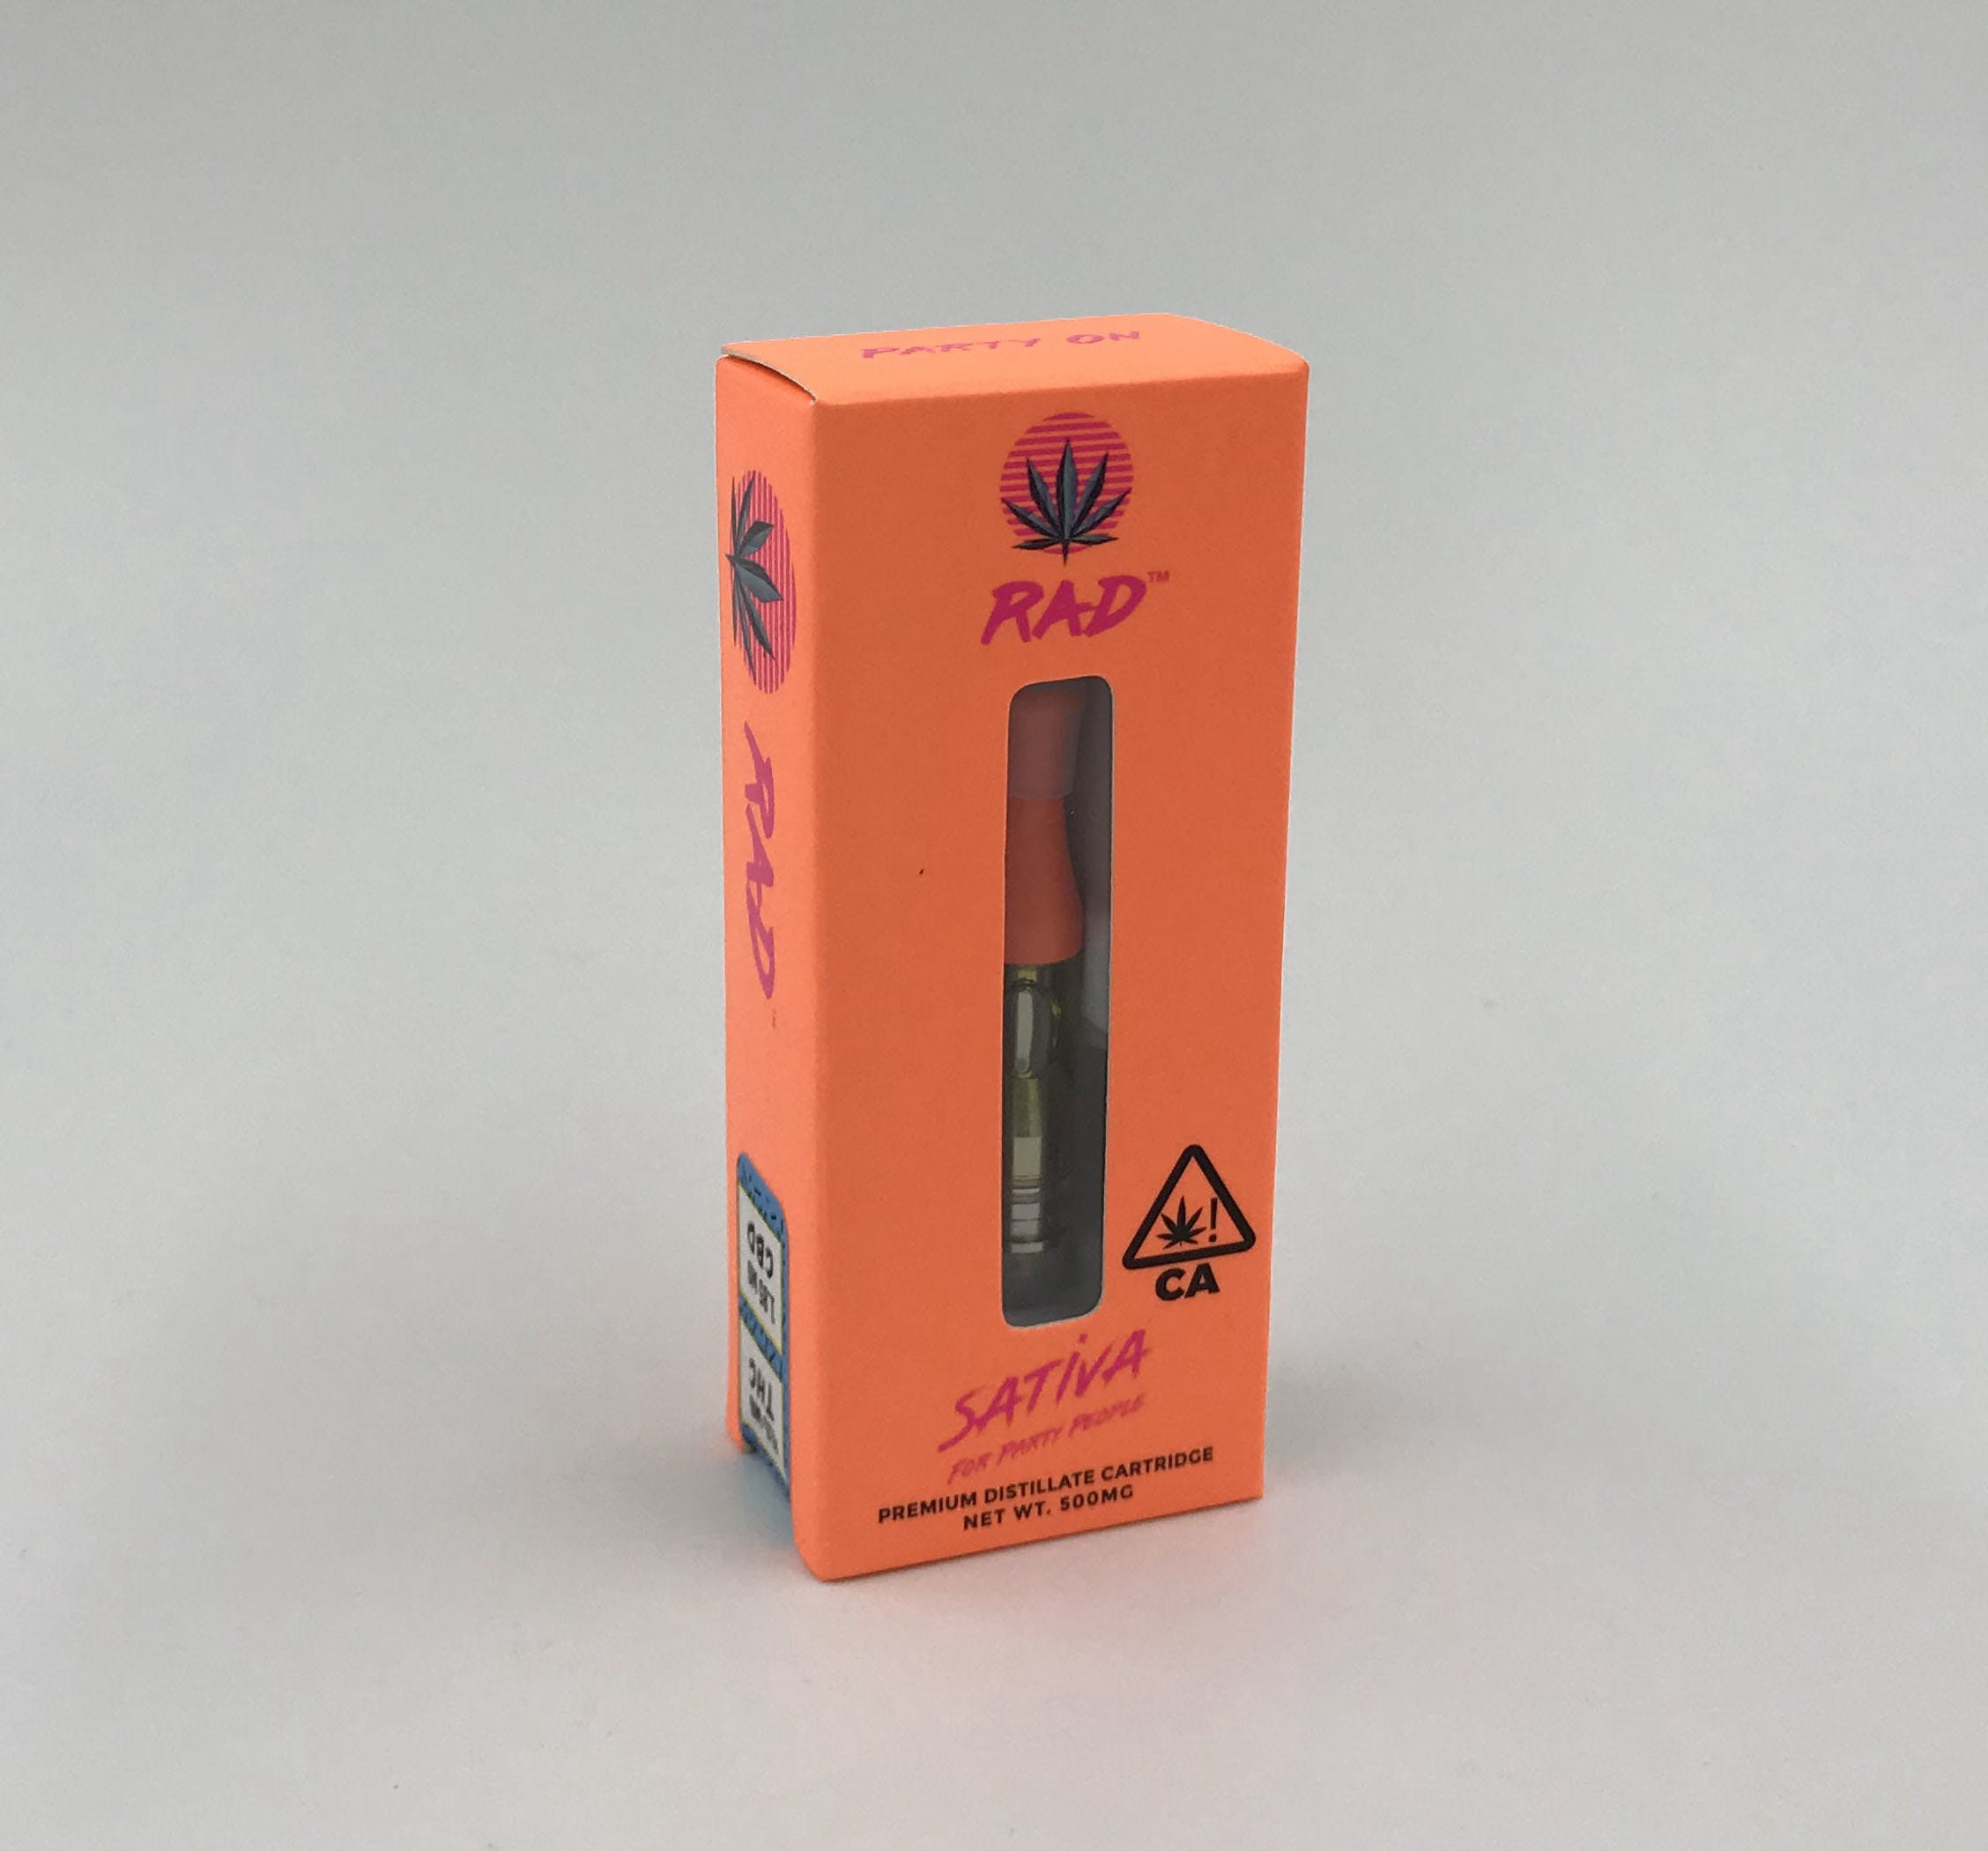 concentrate-rad-neon-dream-cartridges-by-rad